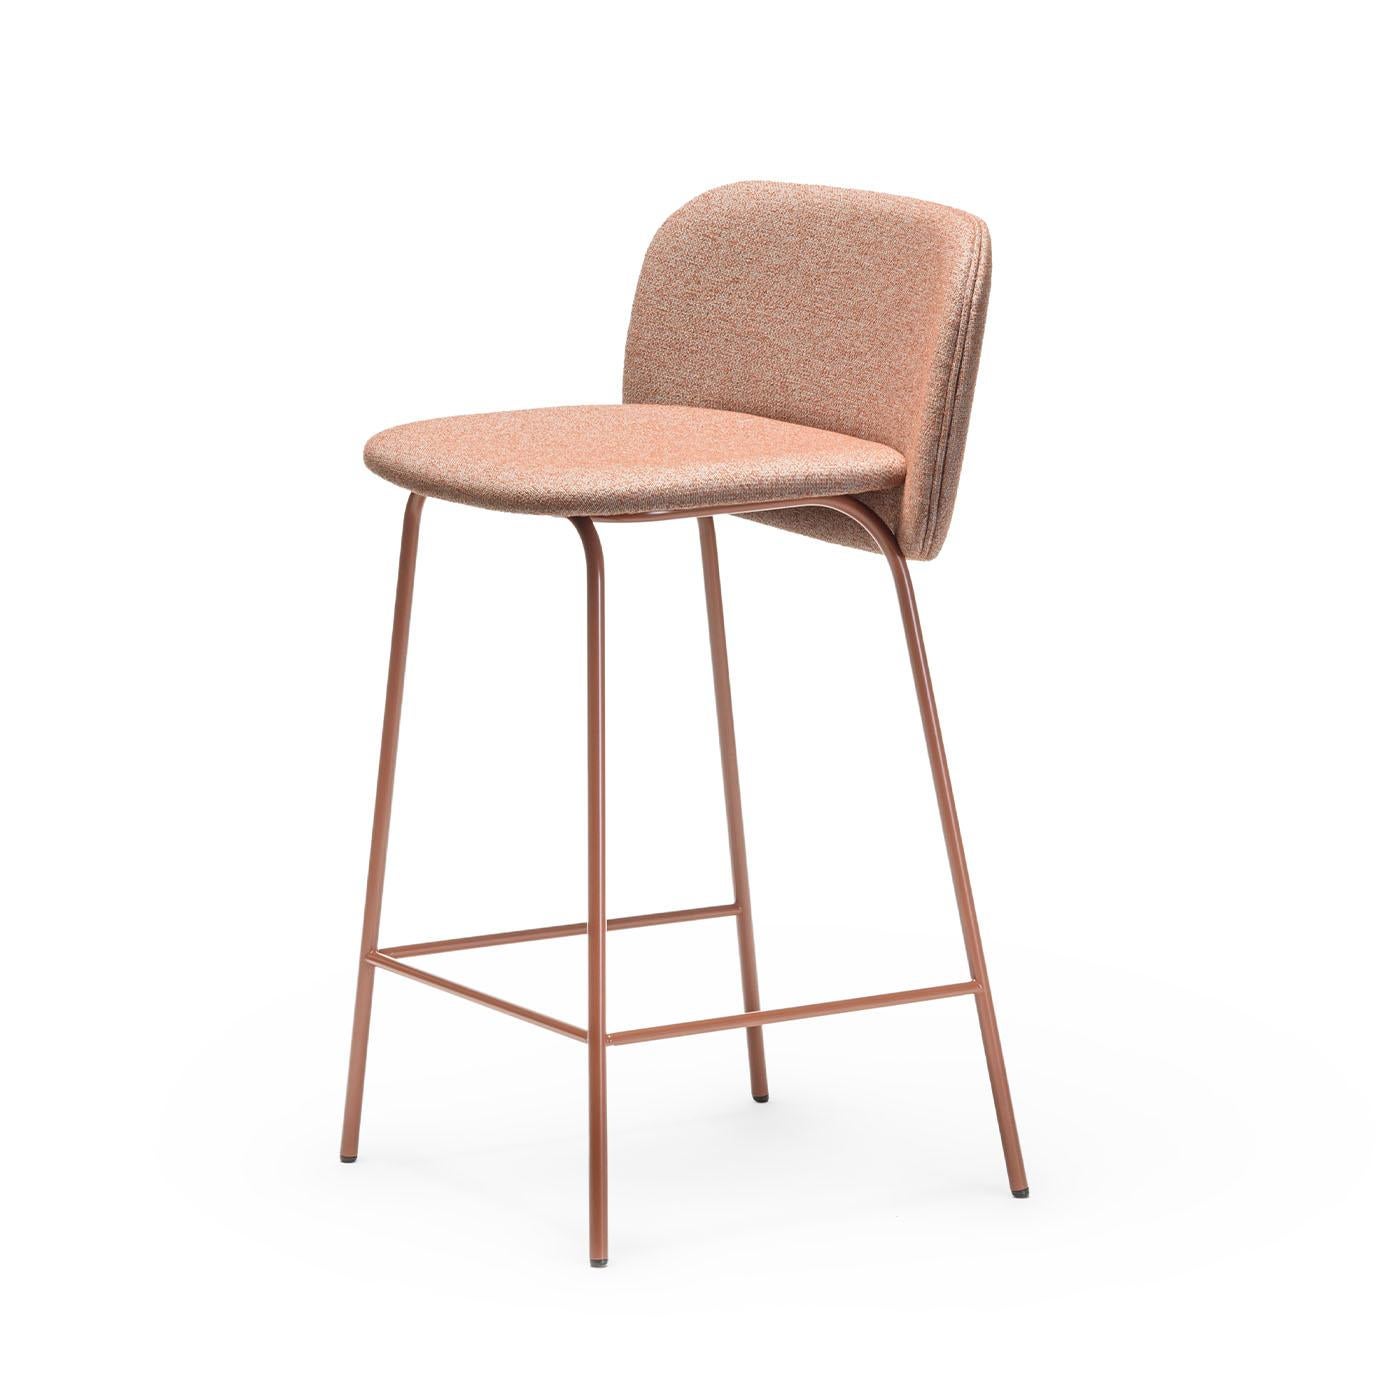 Sleek and slick, the Chips collection is a true eye-catcher, with its unmistakably upbeat, trendy style. The back of the bar stool is without doubt its most iconic and characterizing feature. With its ample curves and generous size, it almost seems